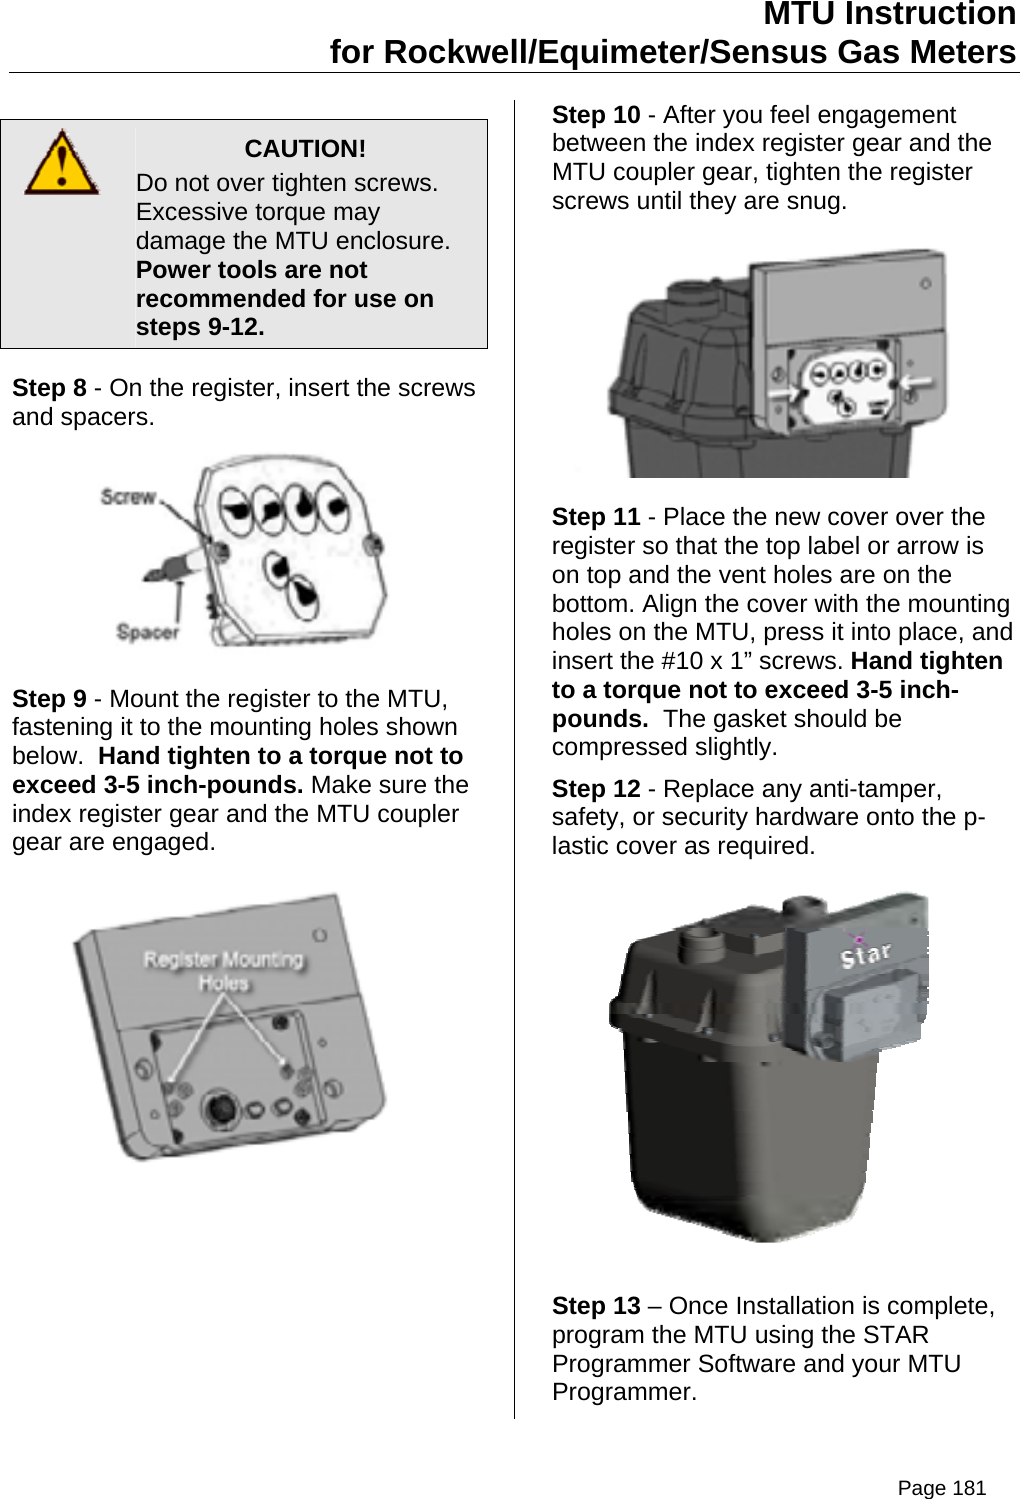 Page 181 of Aclara Technologies 09015 Transmitter for Meter Reading User Manual users manual